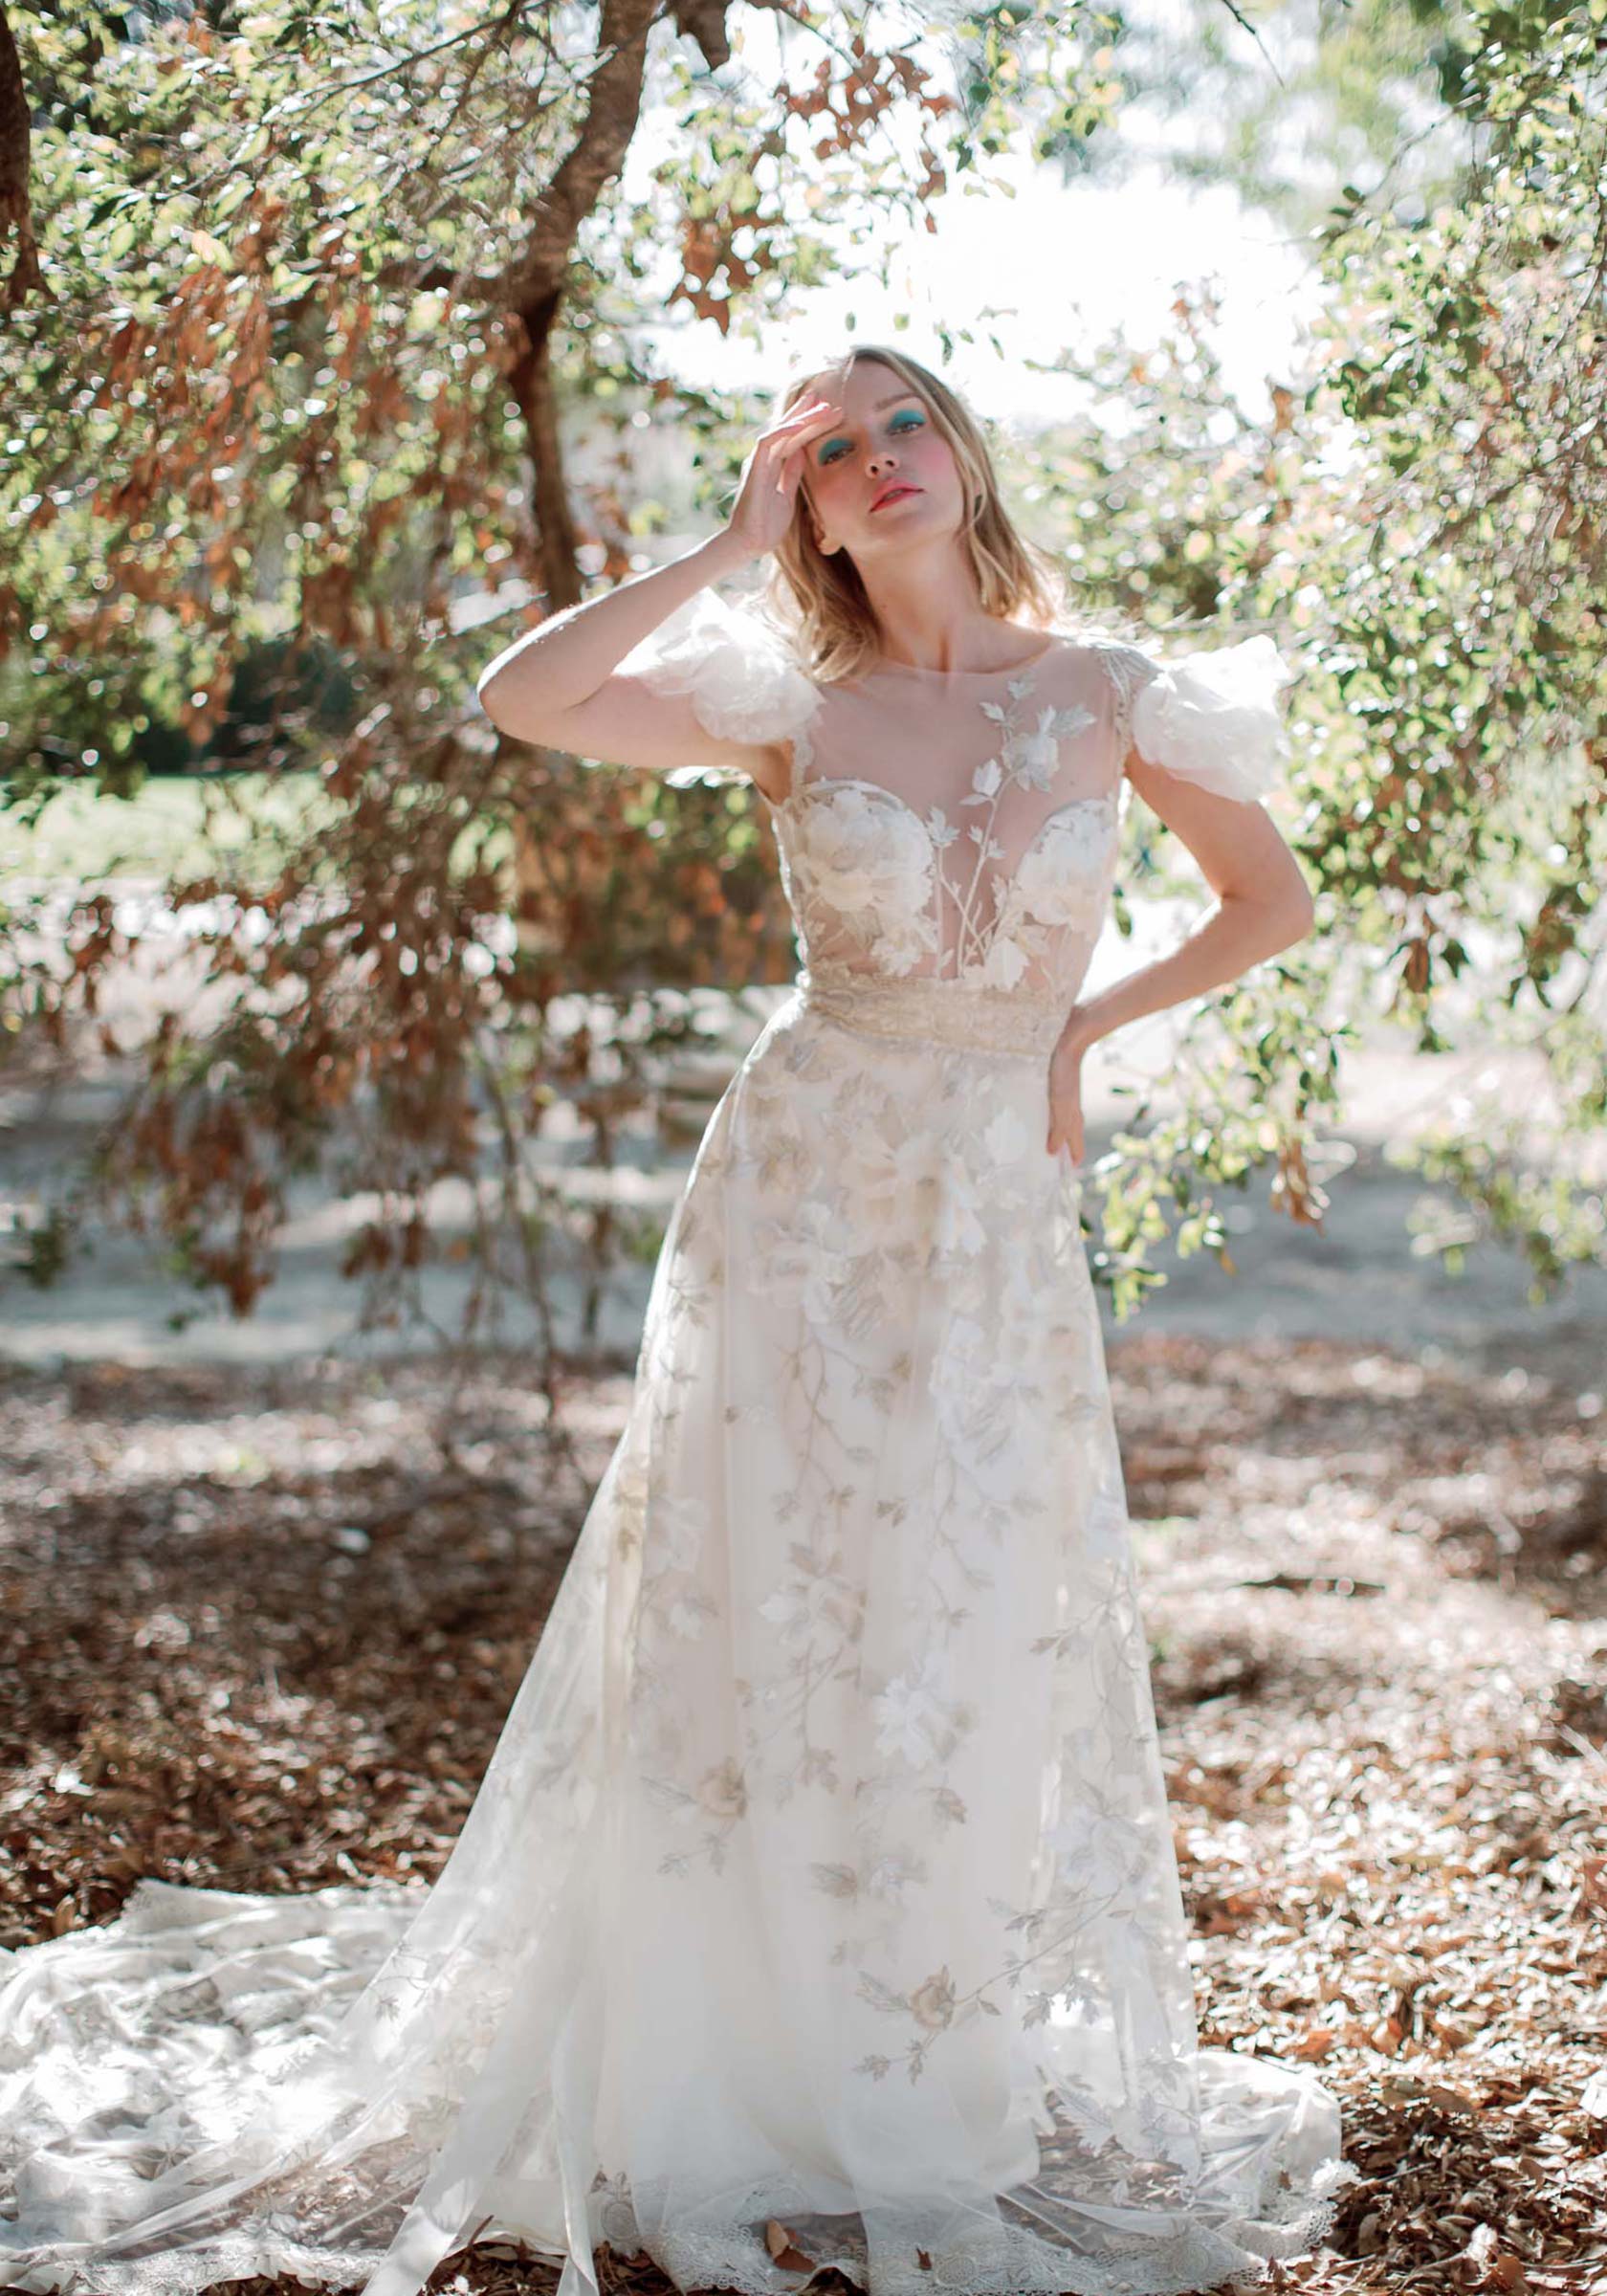 Thistledown Ethereal Bridal Gown with Silk Ribbons Claire Pettibone